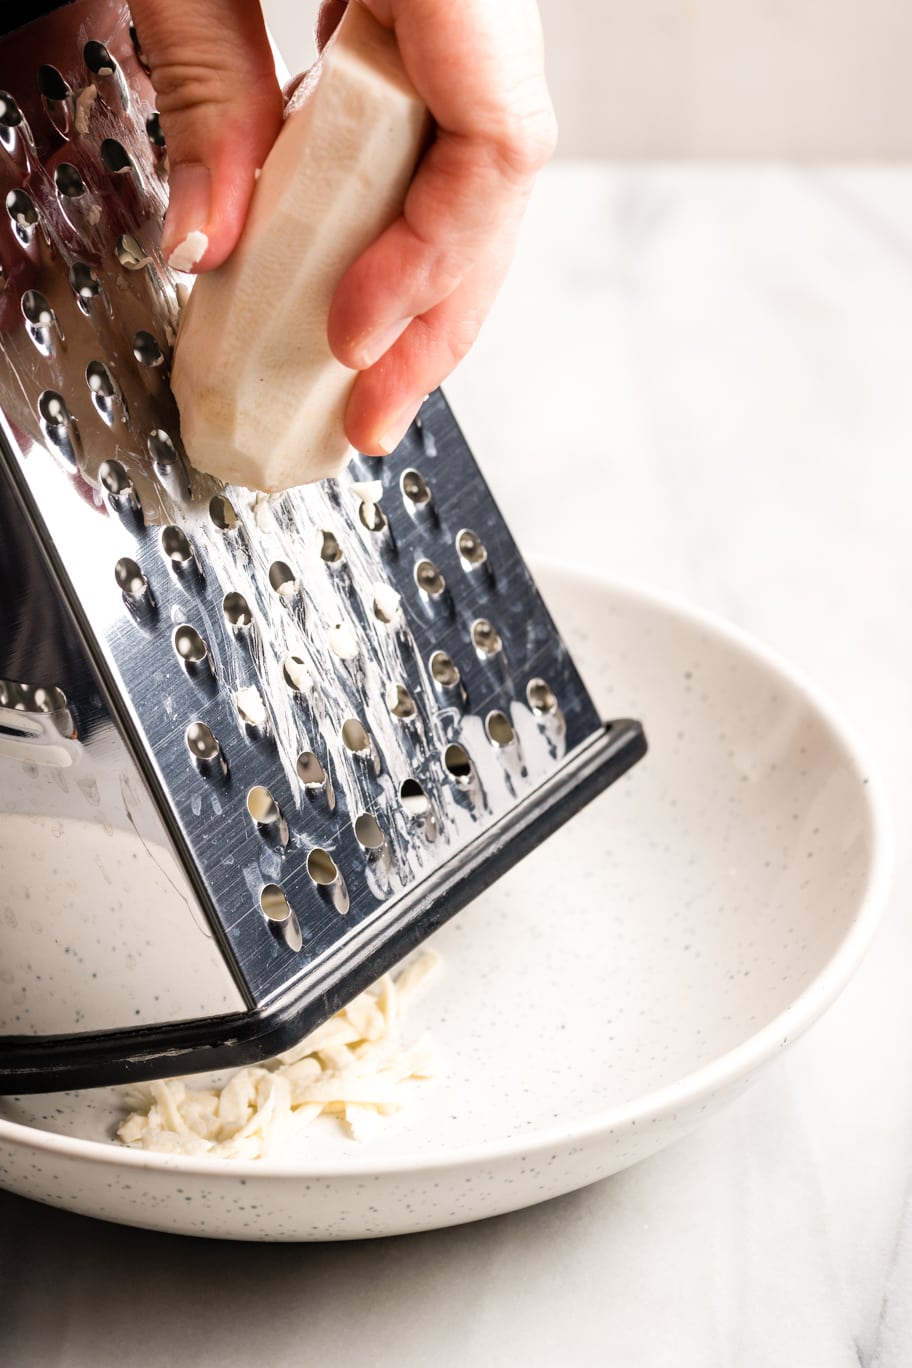 grating the peeled malanga with a box grater onto a white plate